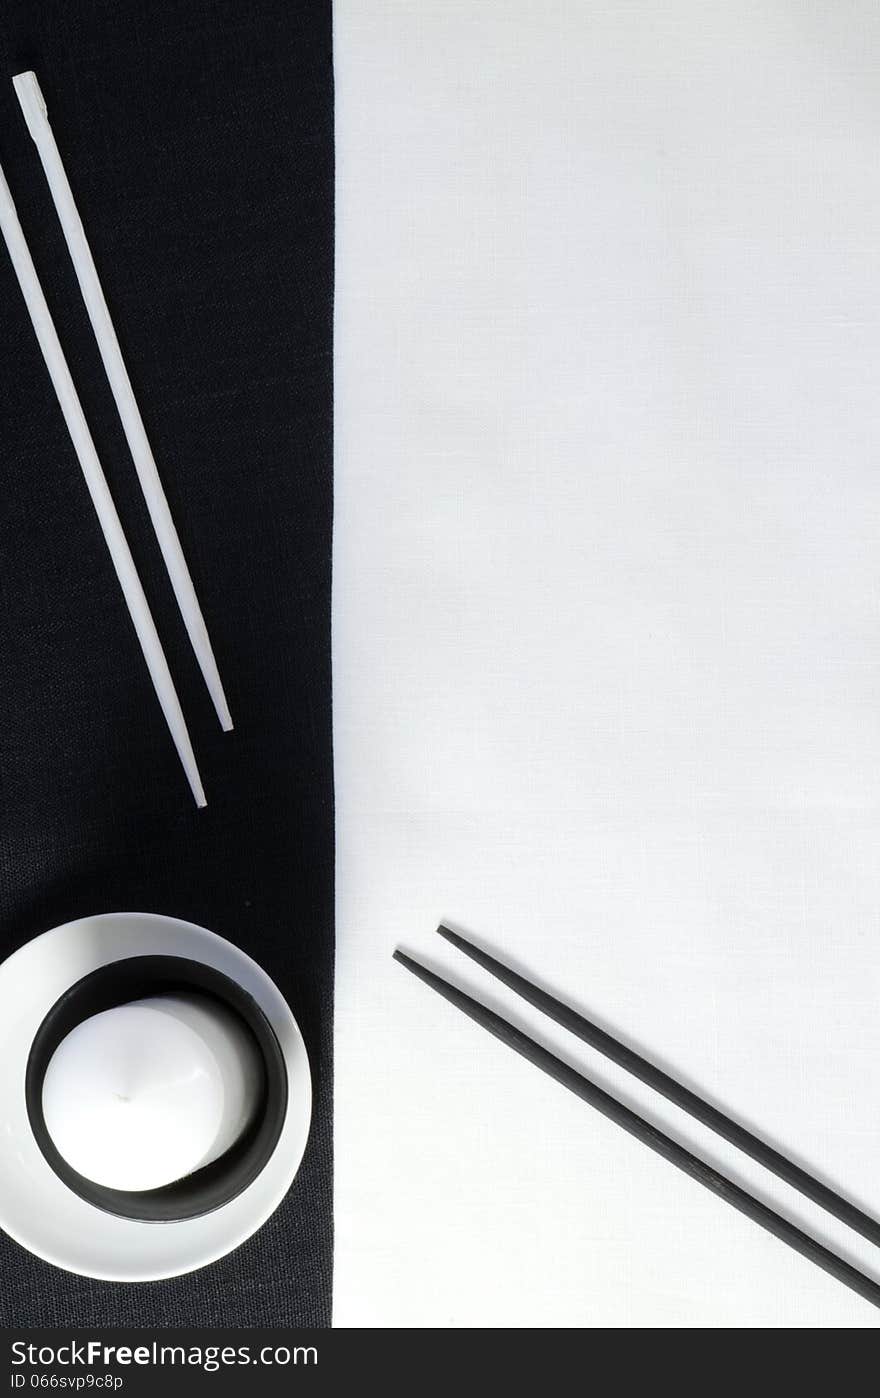 White porcelain on black and white linen tablecloths. White porcelain on black and white linen tablecloths. Abstract still life. From series Playing with Color